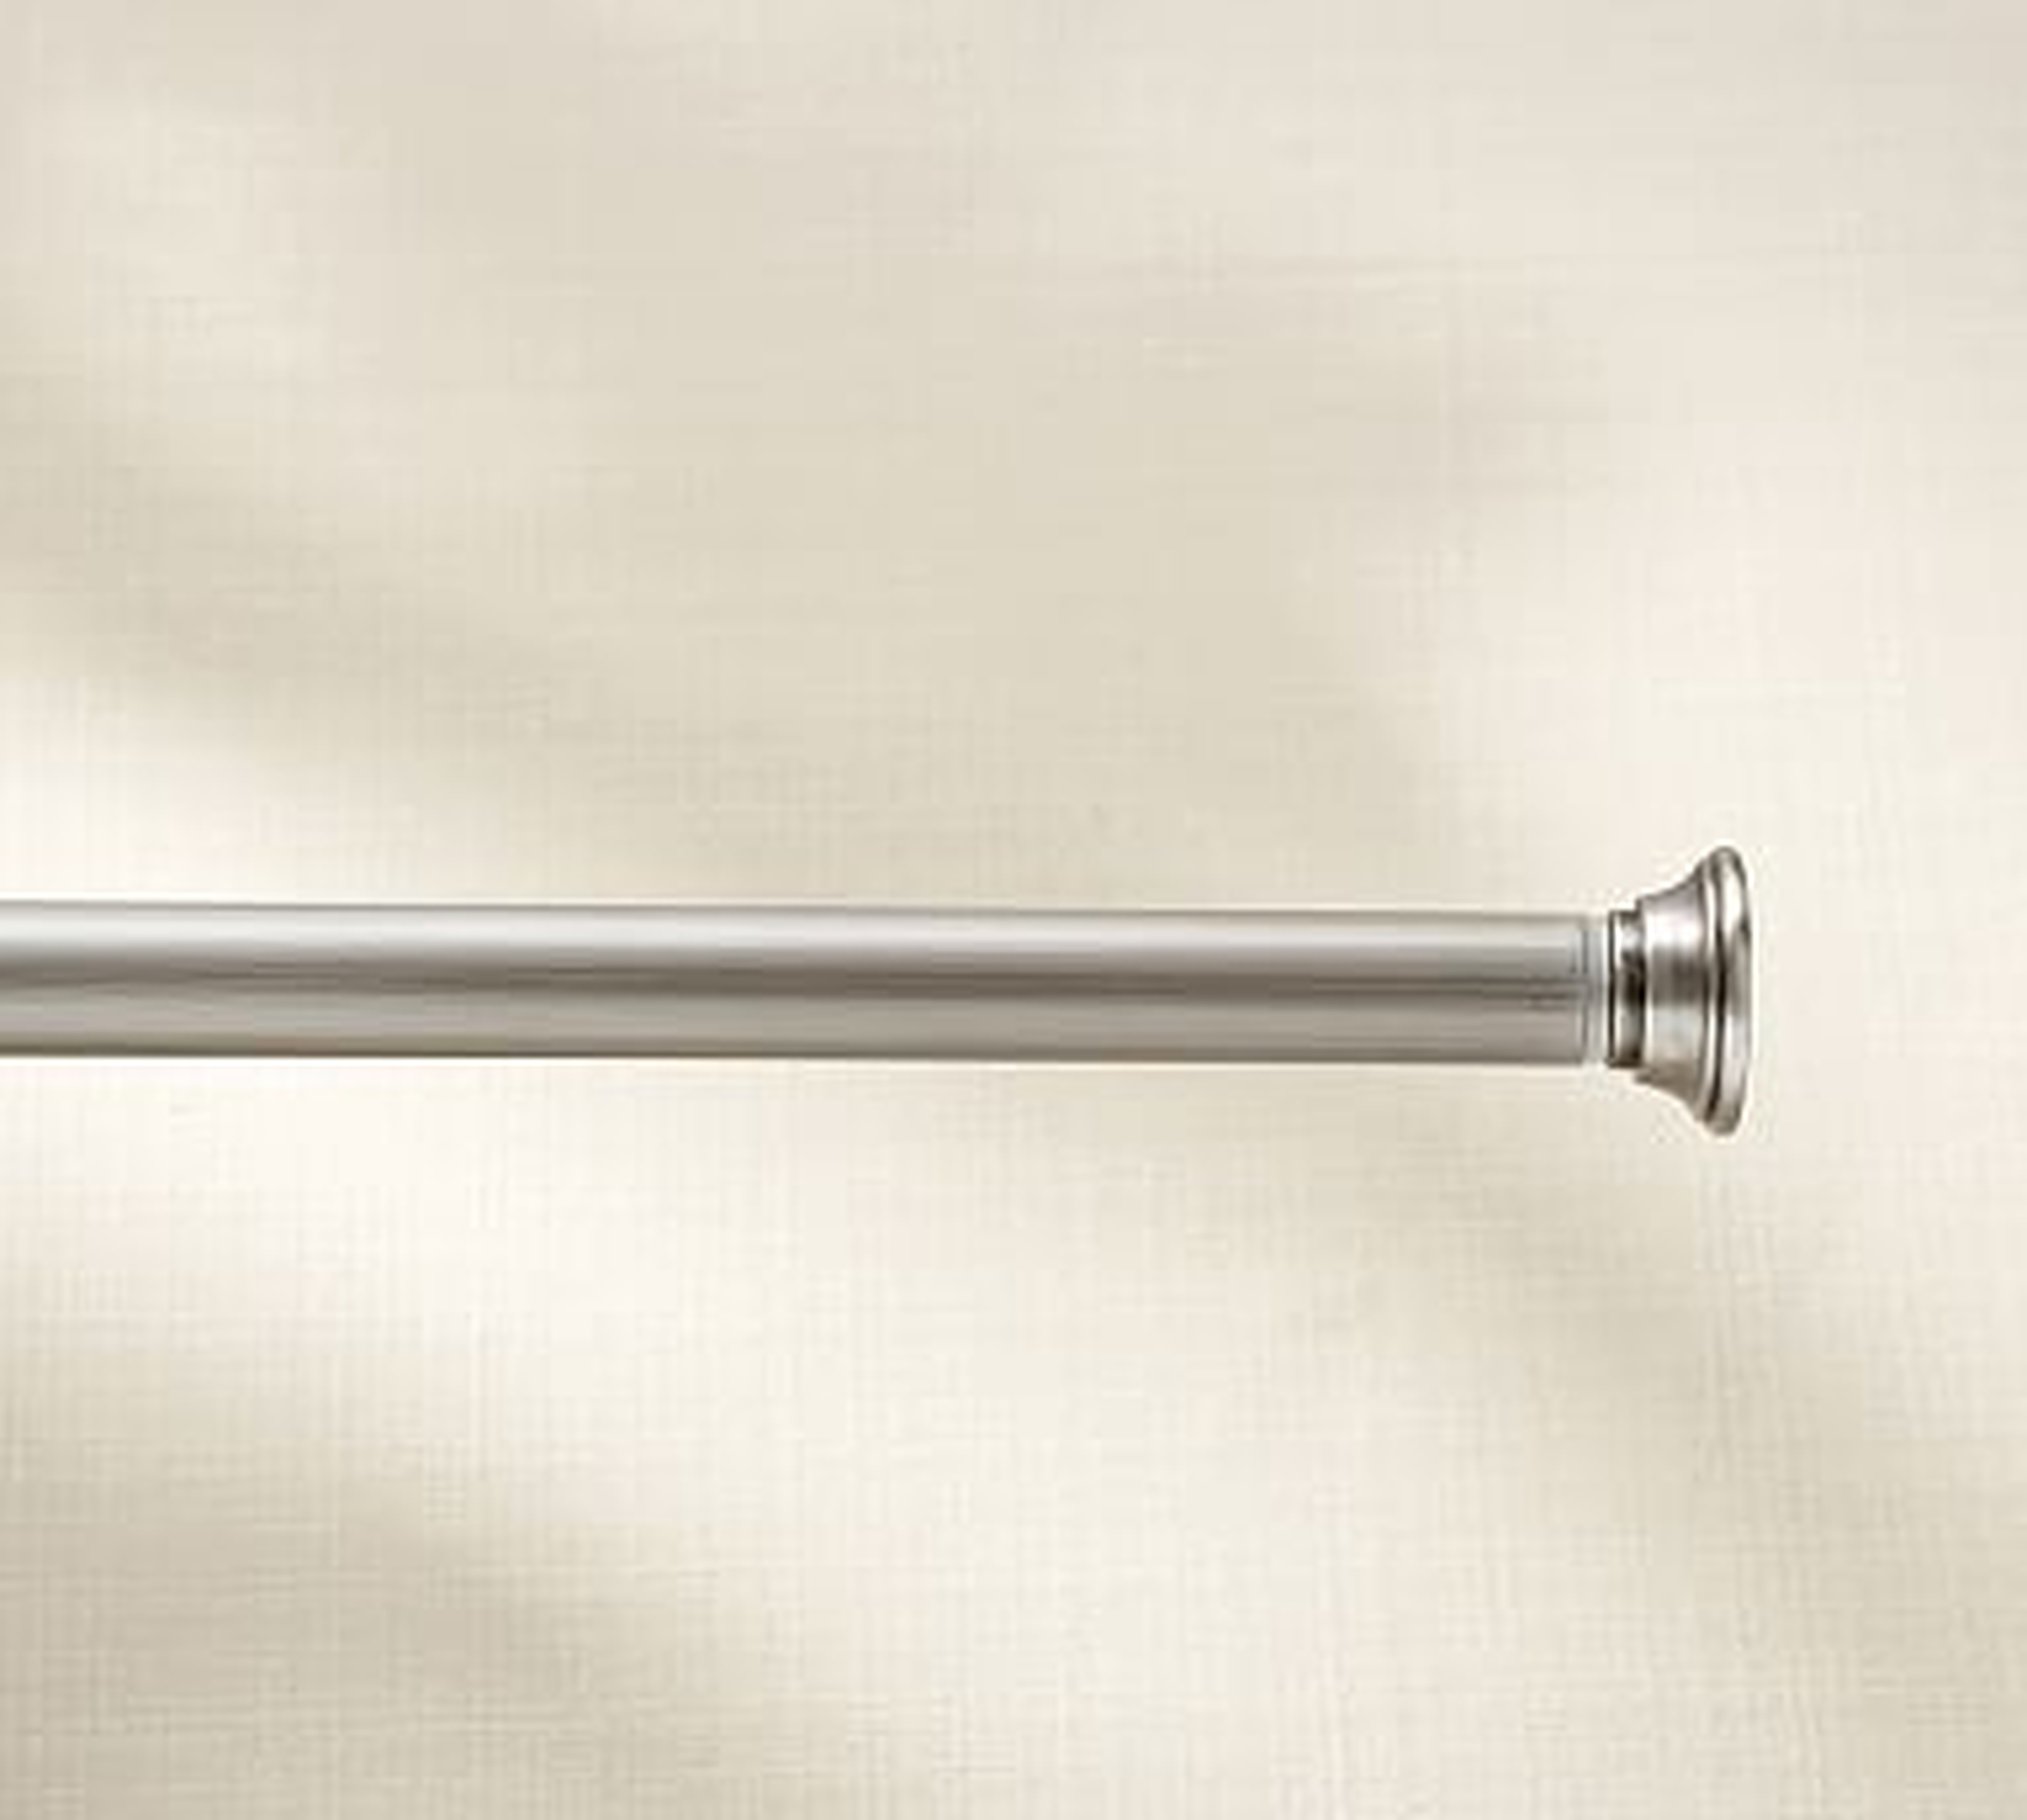 PB Essential Endcap Finial Curtain Rod, Large, Pewter Finish - Pottery Barn